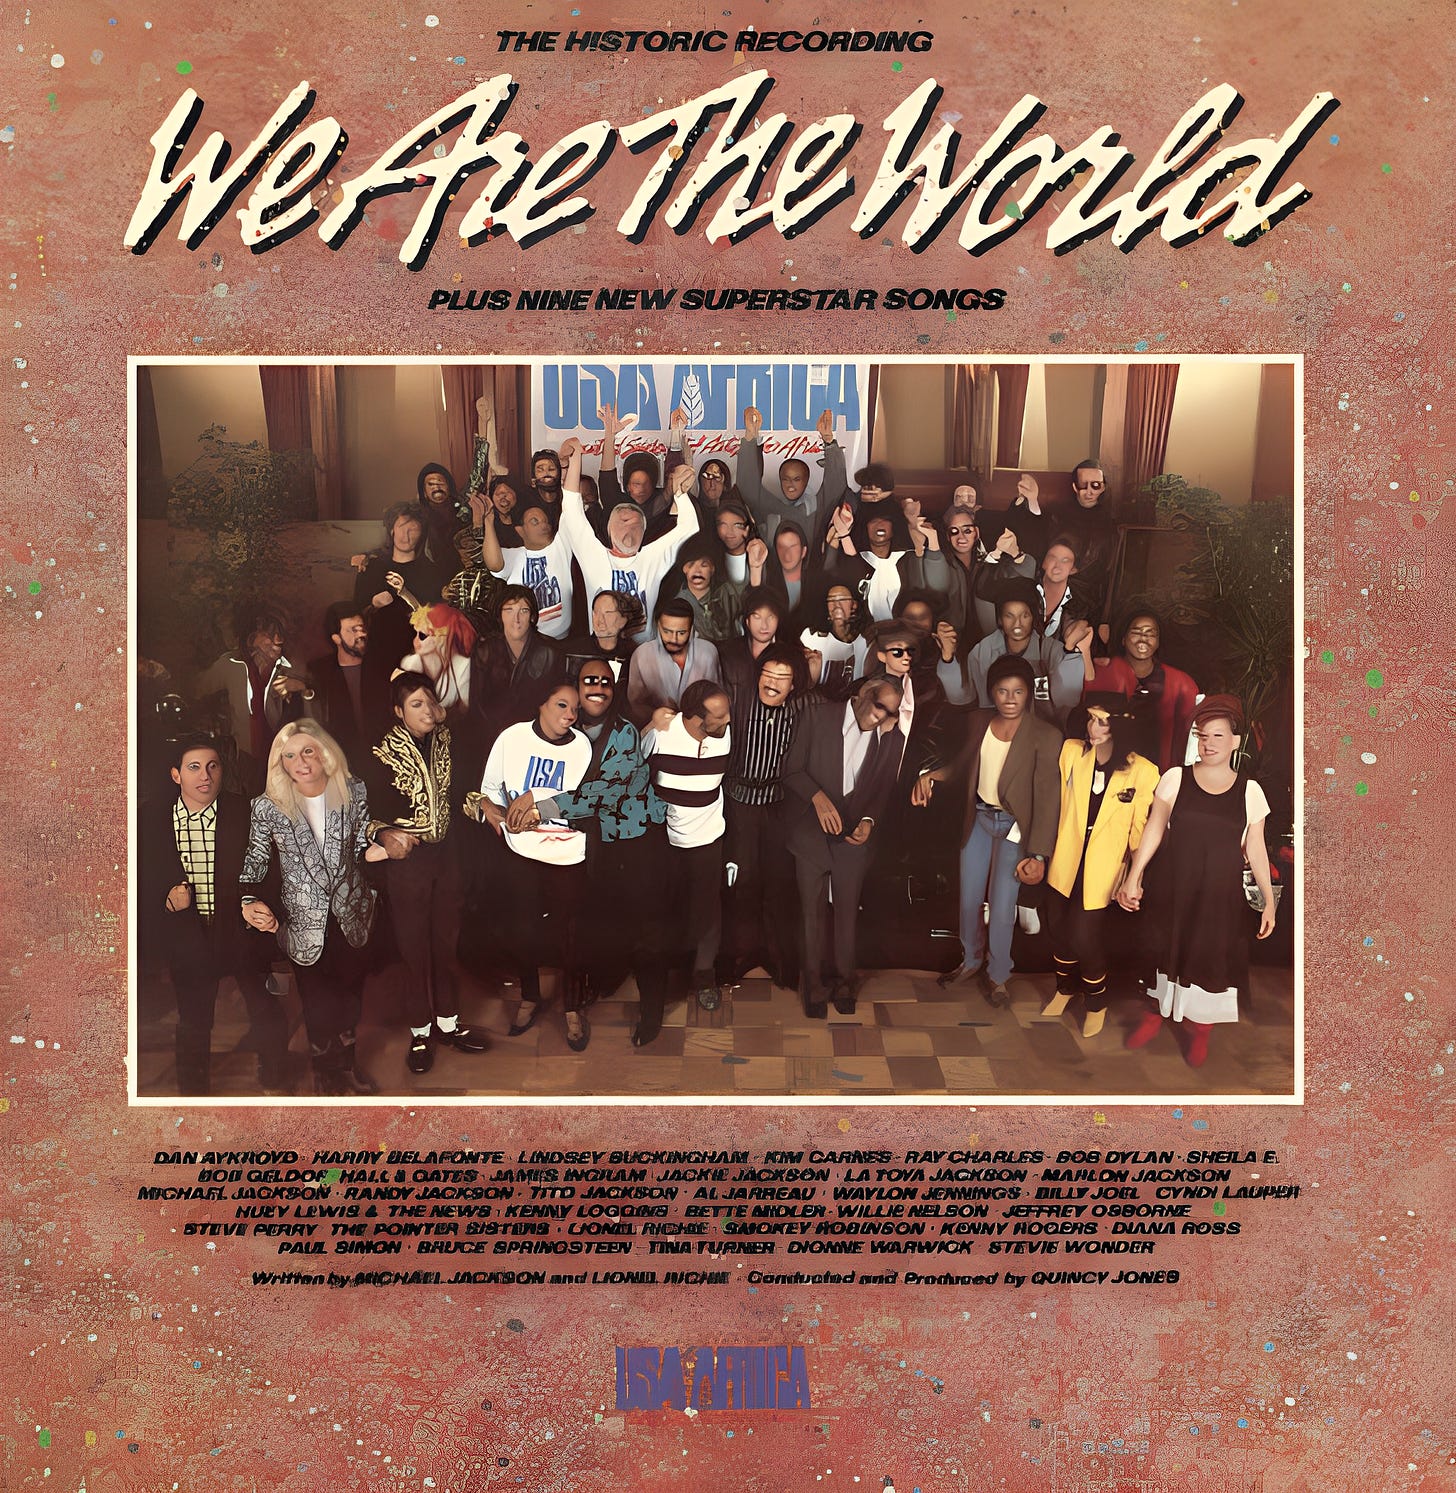 We Are the World single cover